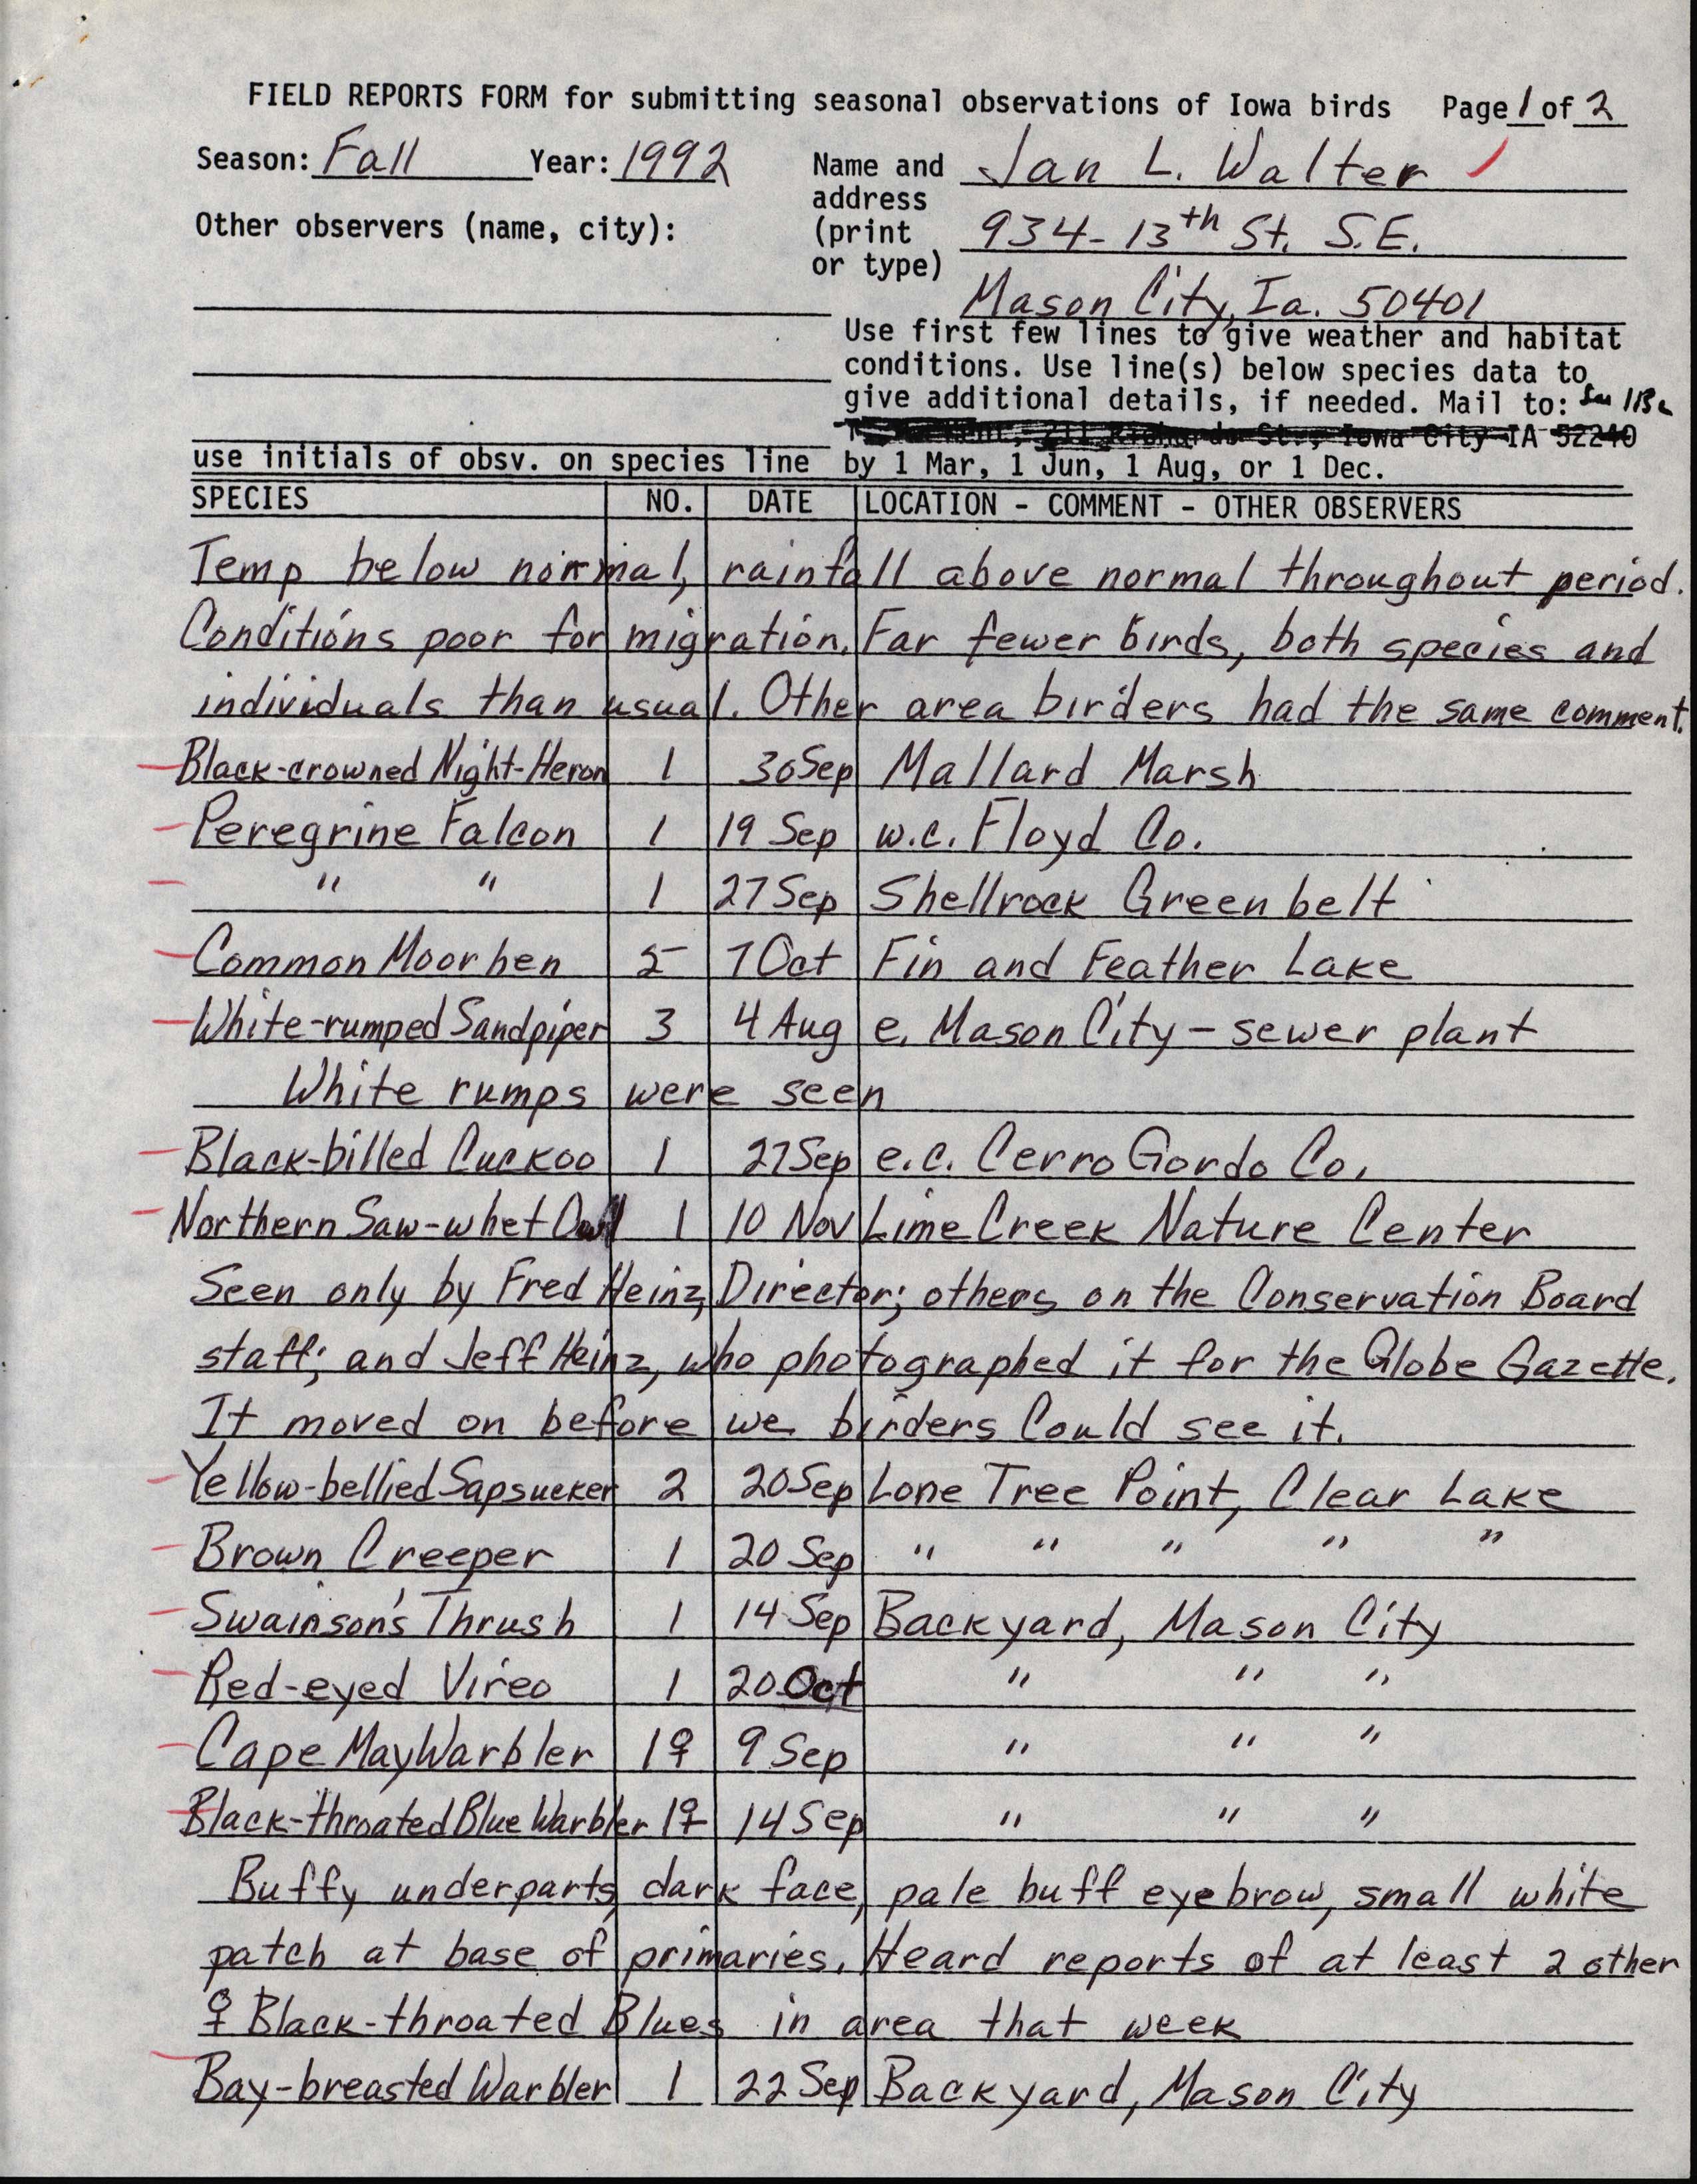 Field reports form for submitting seasonal observations of Iowa birds, Jan L. Walter, fall 1992